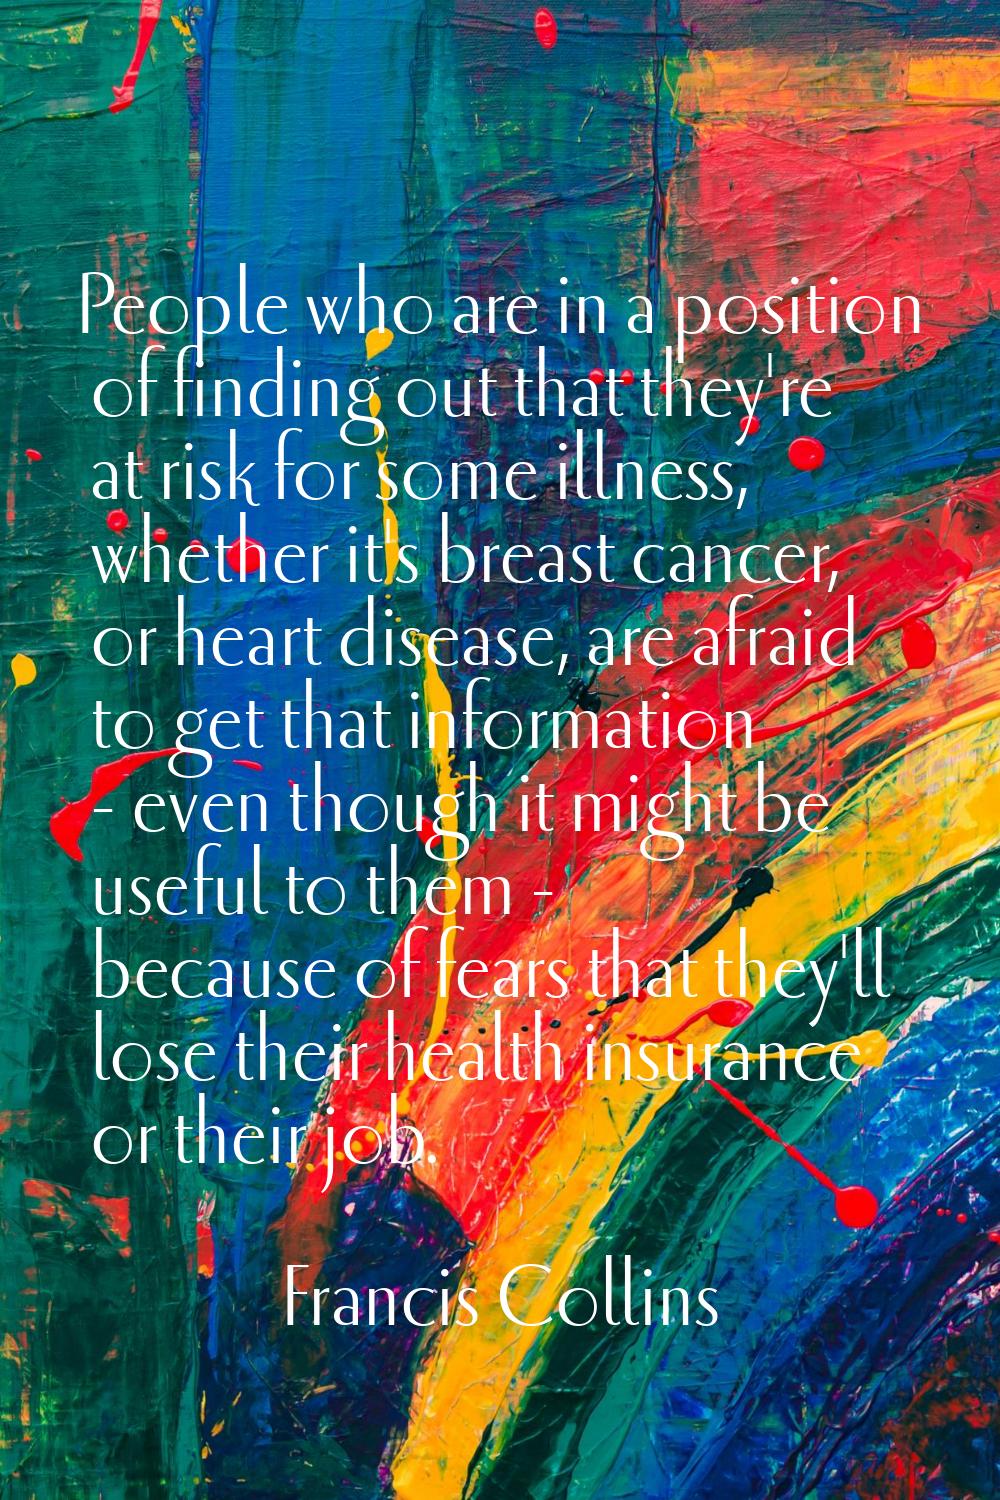 People who are in a position of finding out that they're at risk for some illness, whether it's bre